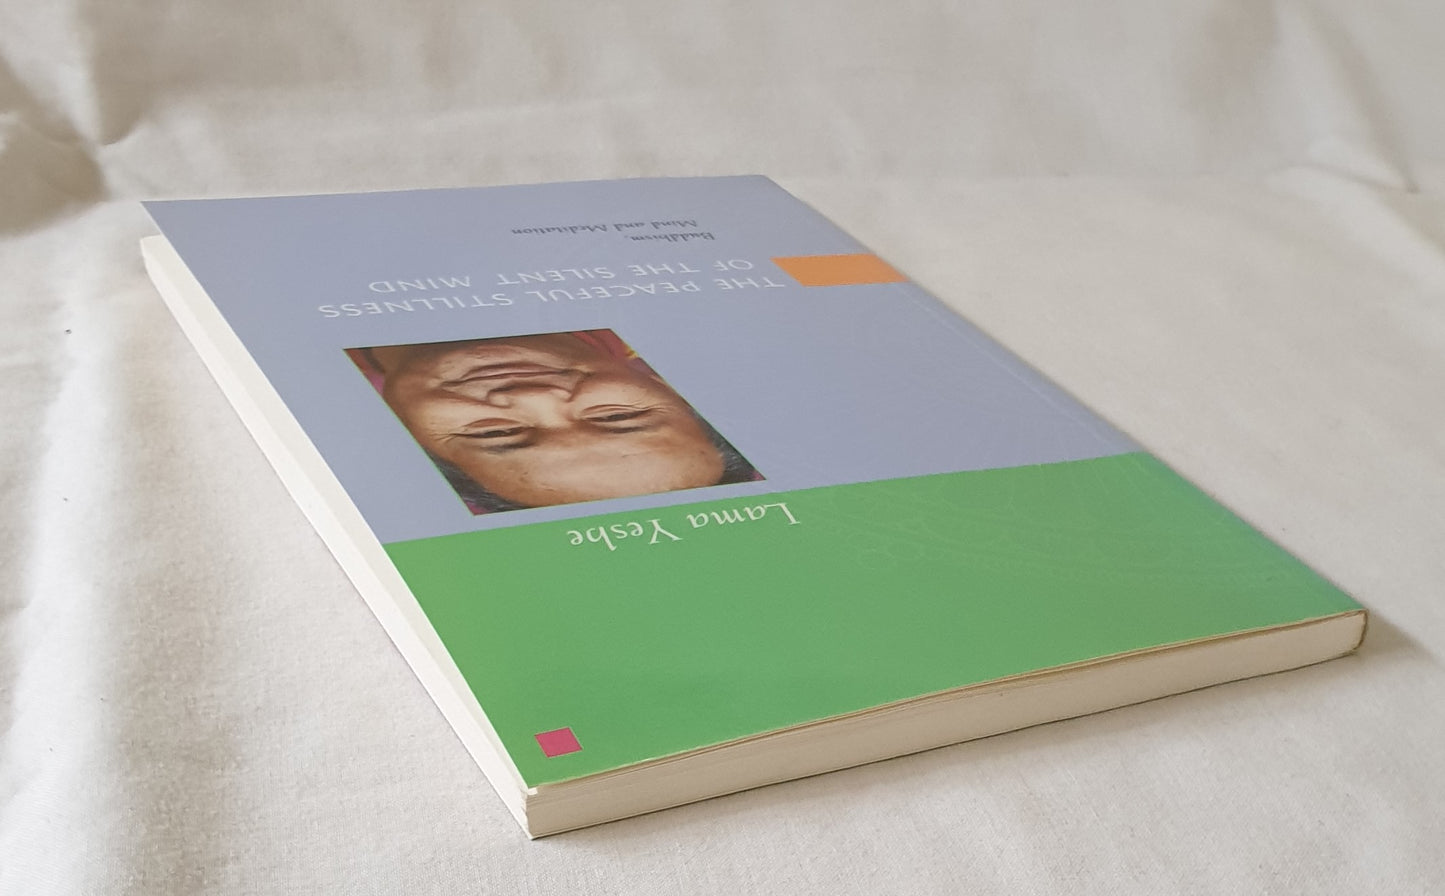 The Peaceful Stillness of the Silent Mind by Lama Yeshe